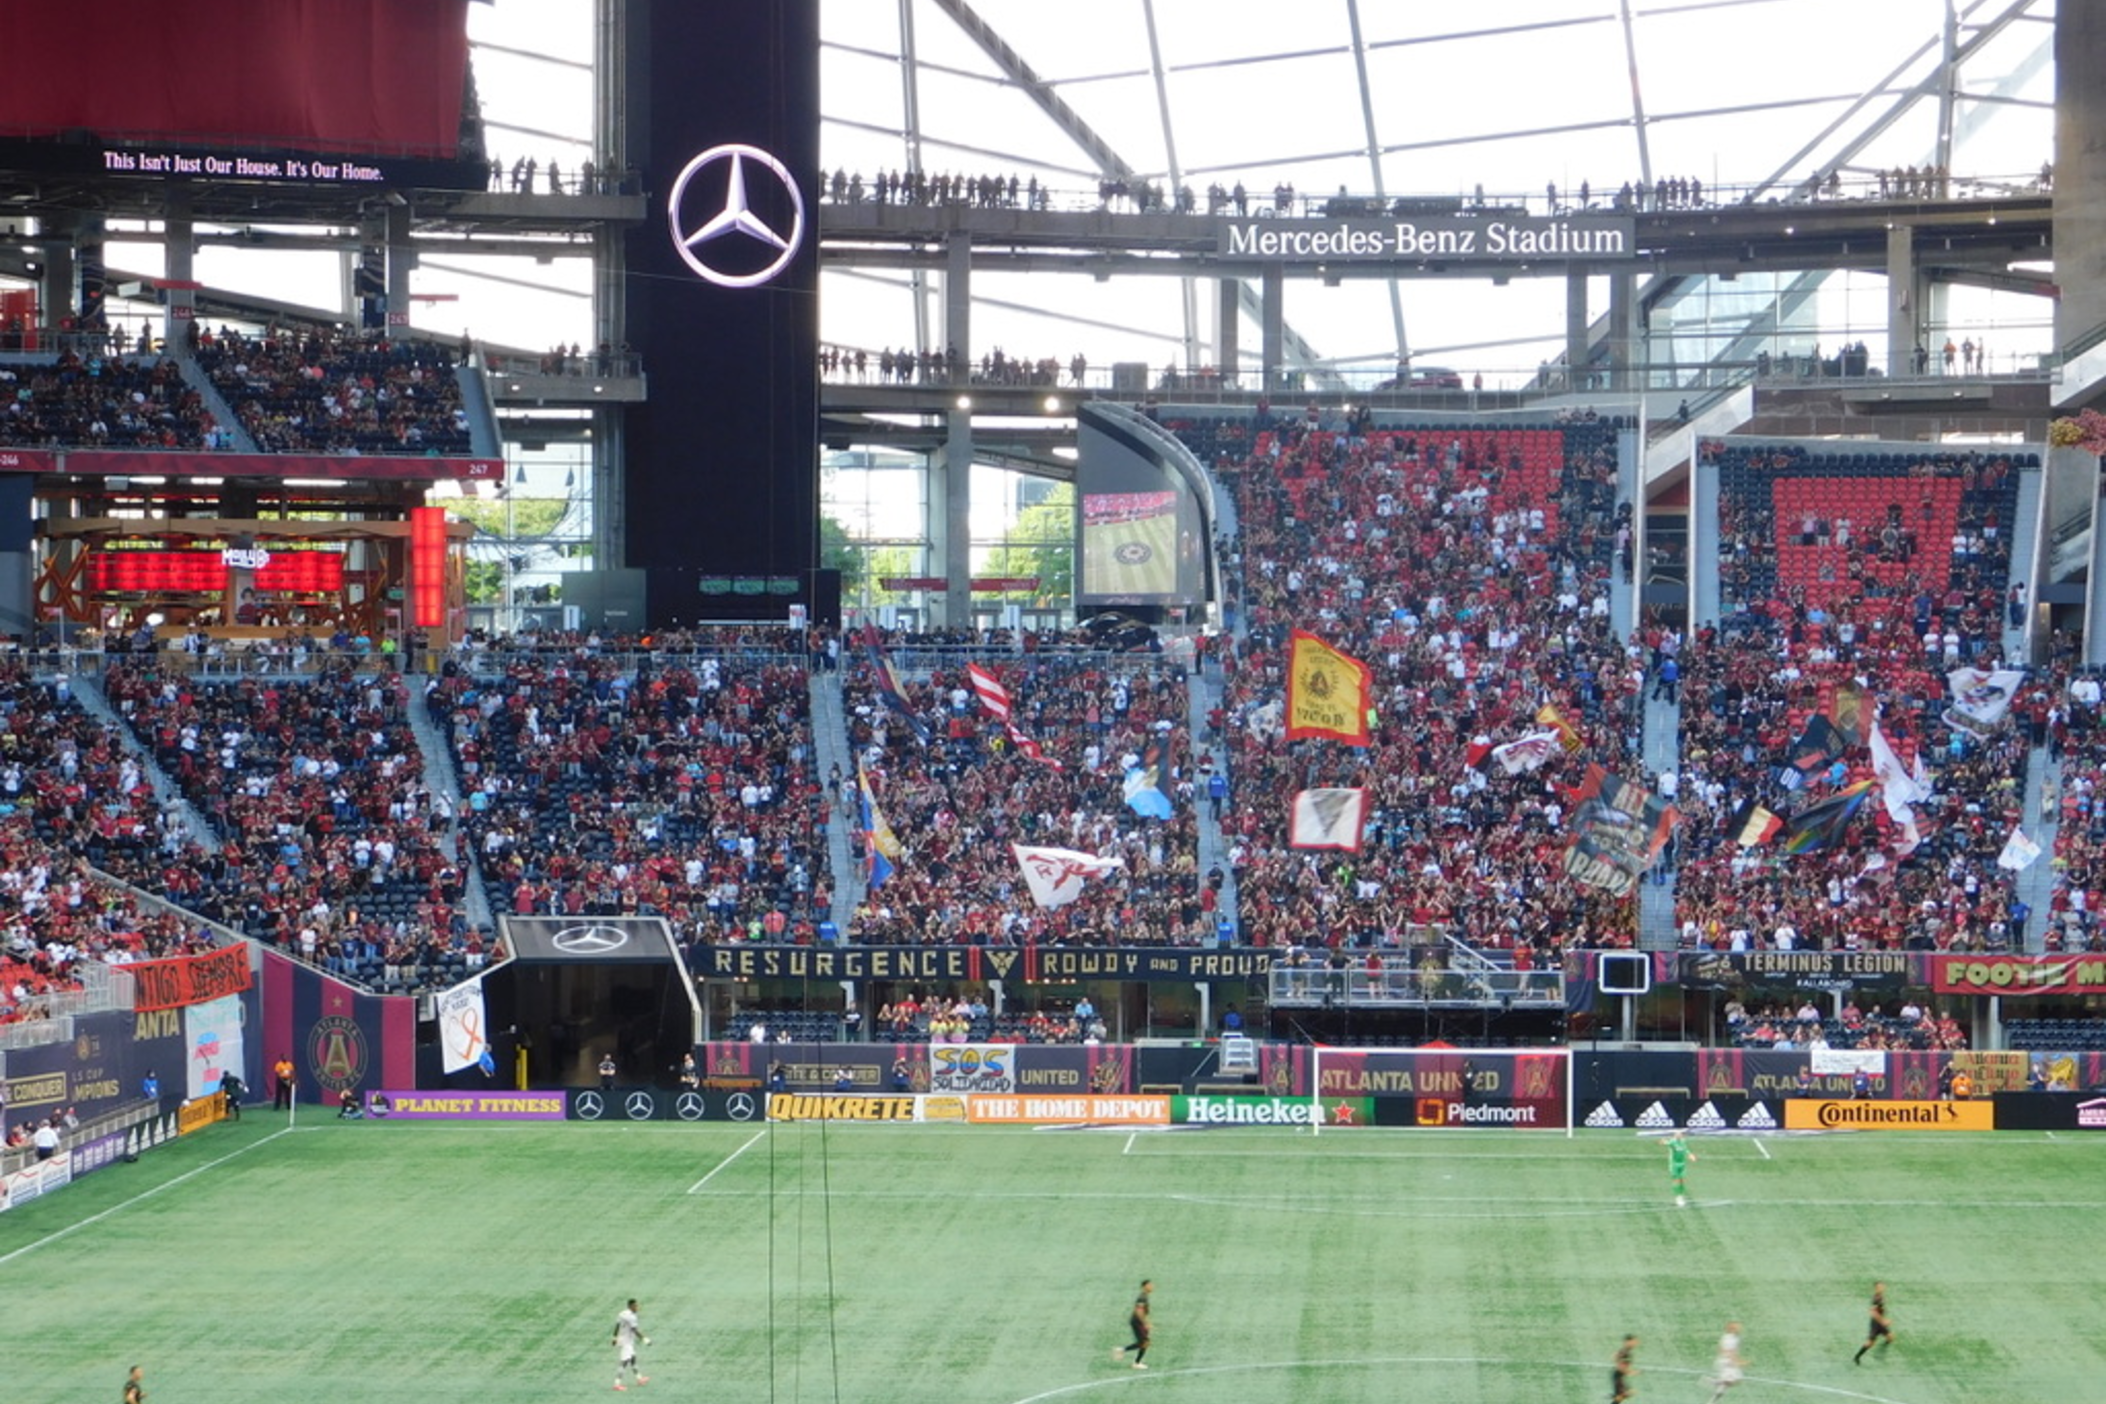 Over 40,000 attended the first full-capacity Atlanta United game on Saturday – a record number since the onset of the COVID-19 pandemic..